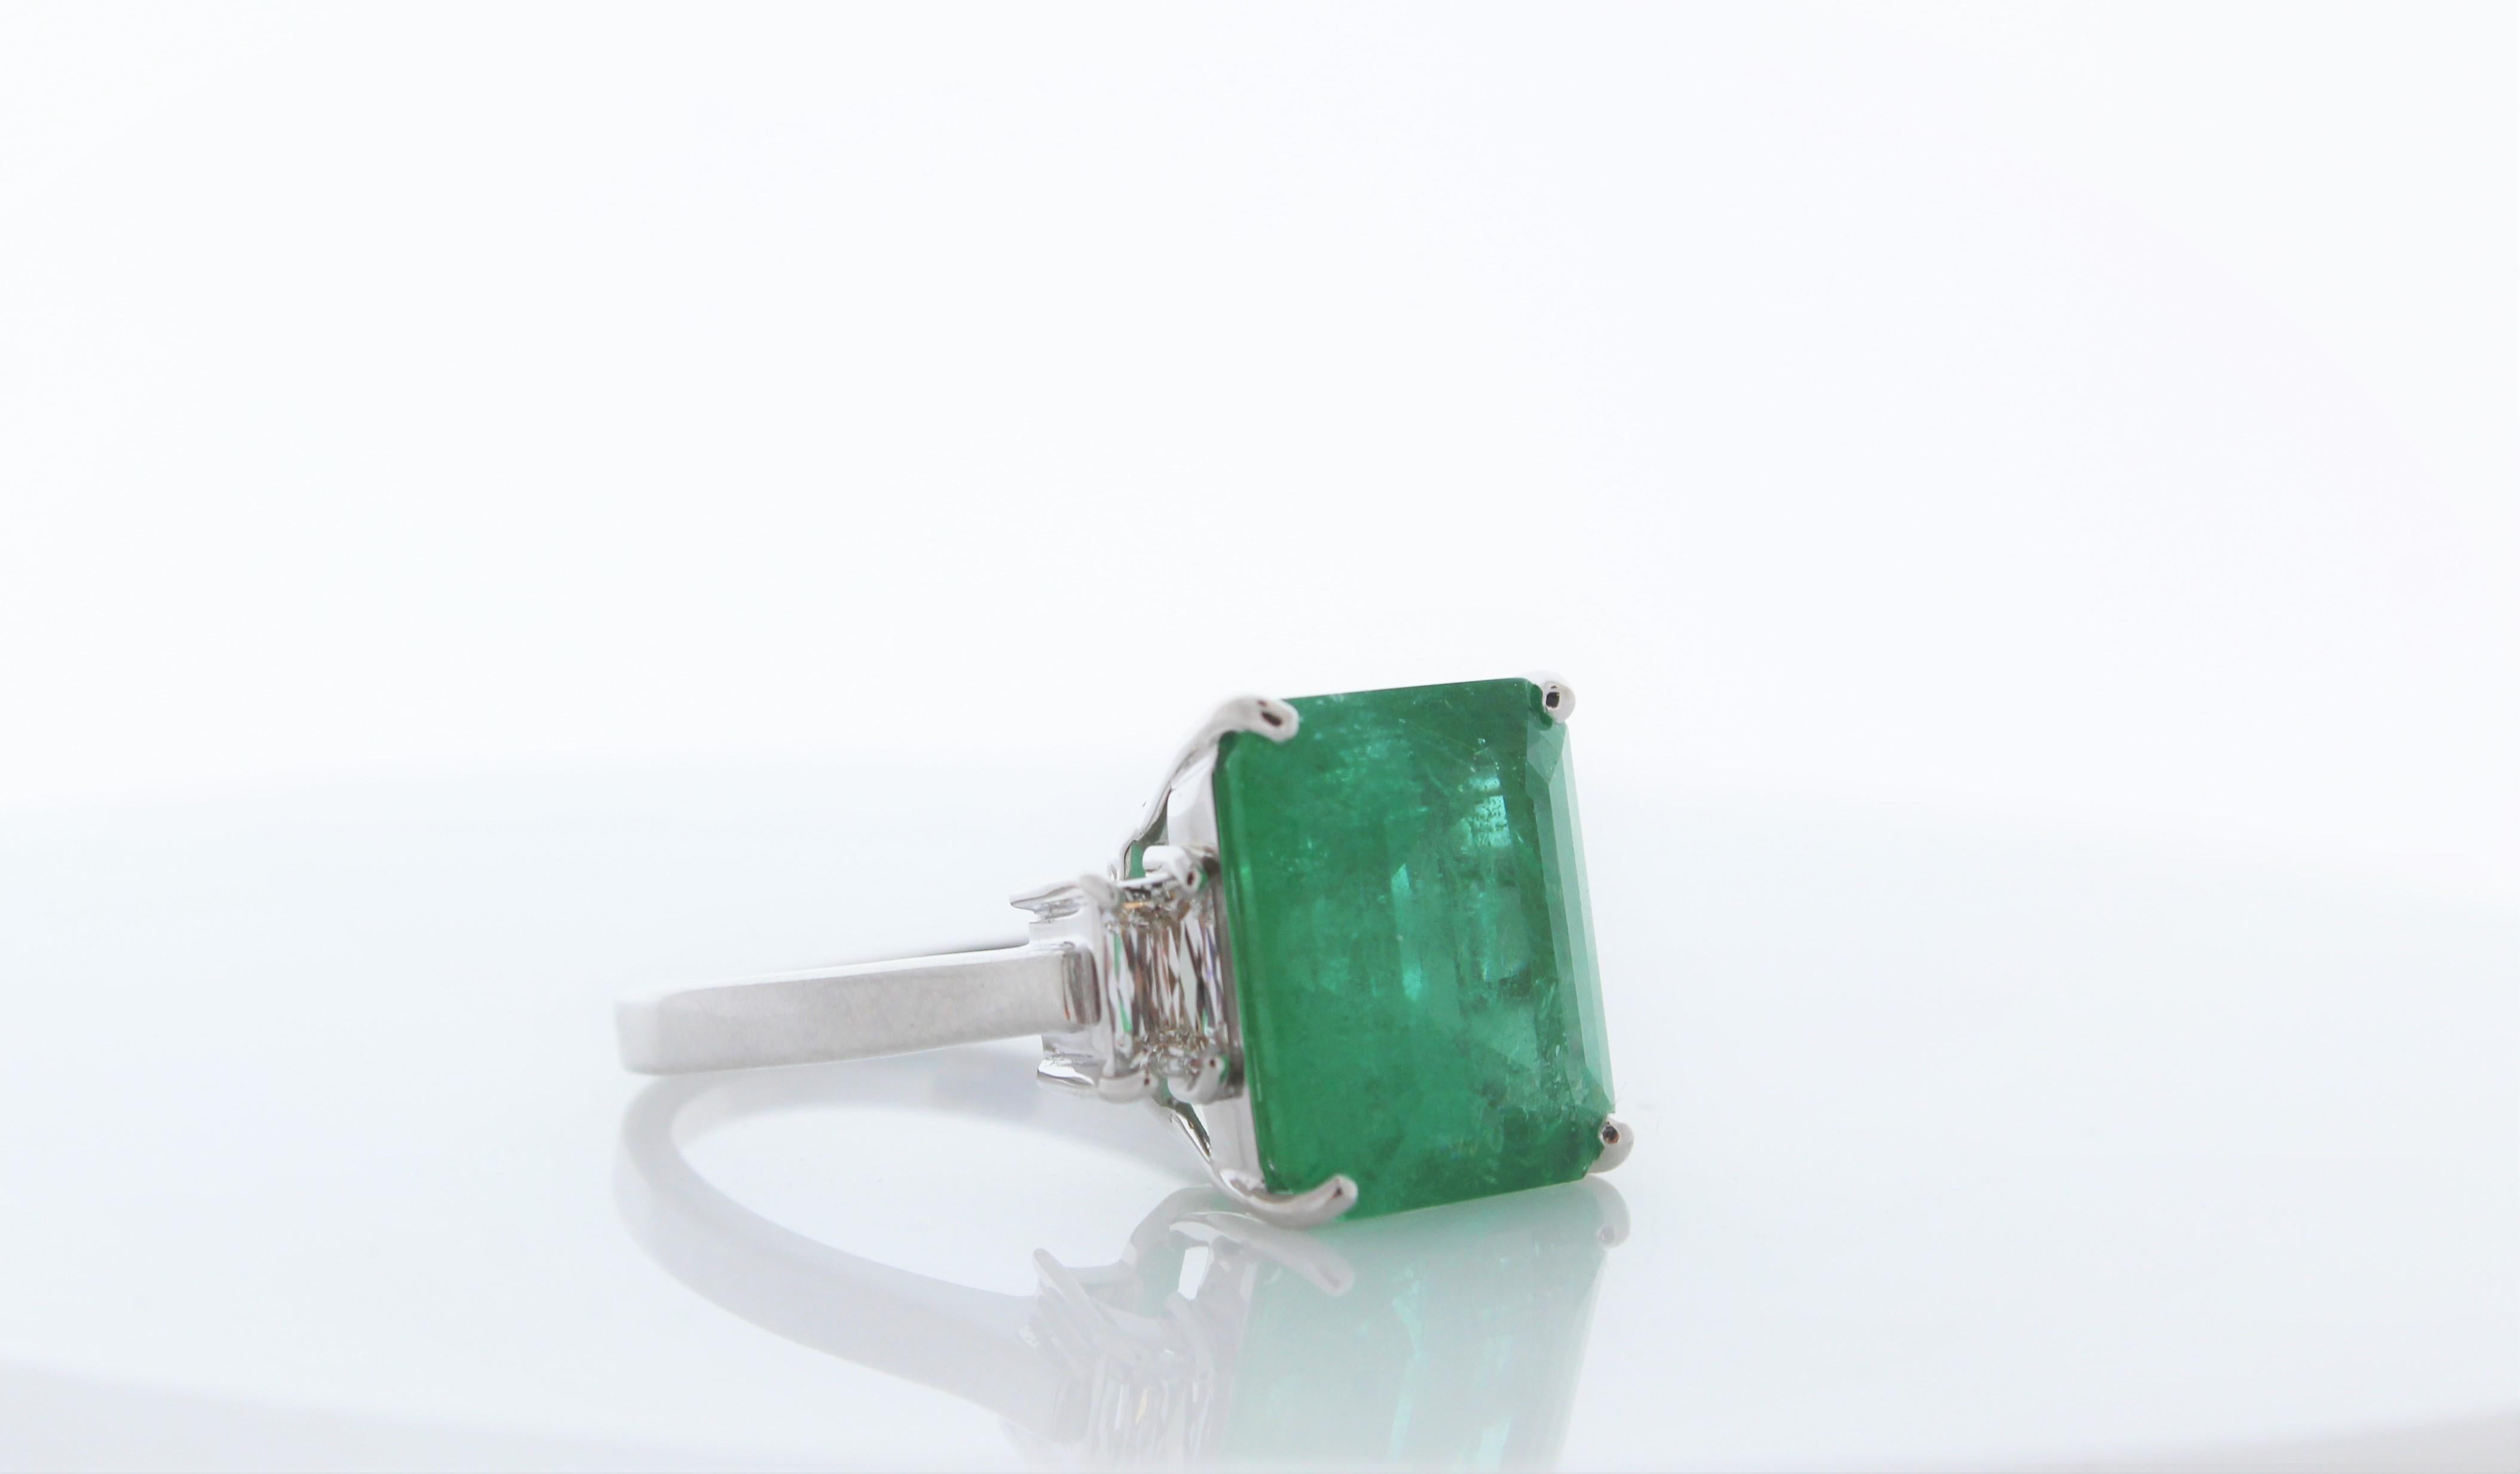 This is a 7.70 cushion cut intense green emerald. The gem source is Colombia; its color is vibrant grass green. Its transparency and luster are excellent. There are two diamonds totaling up to .84 carats. Created in brightly polished 18 K white